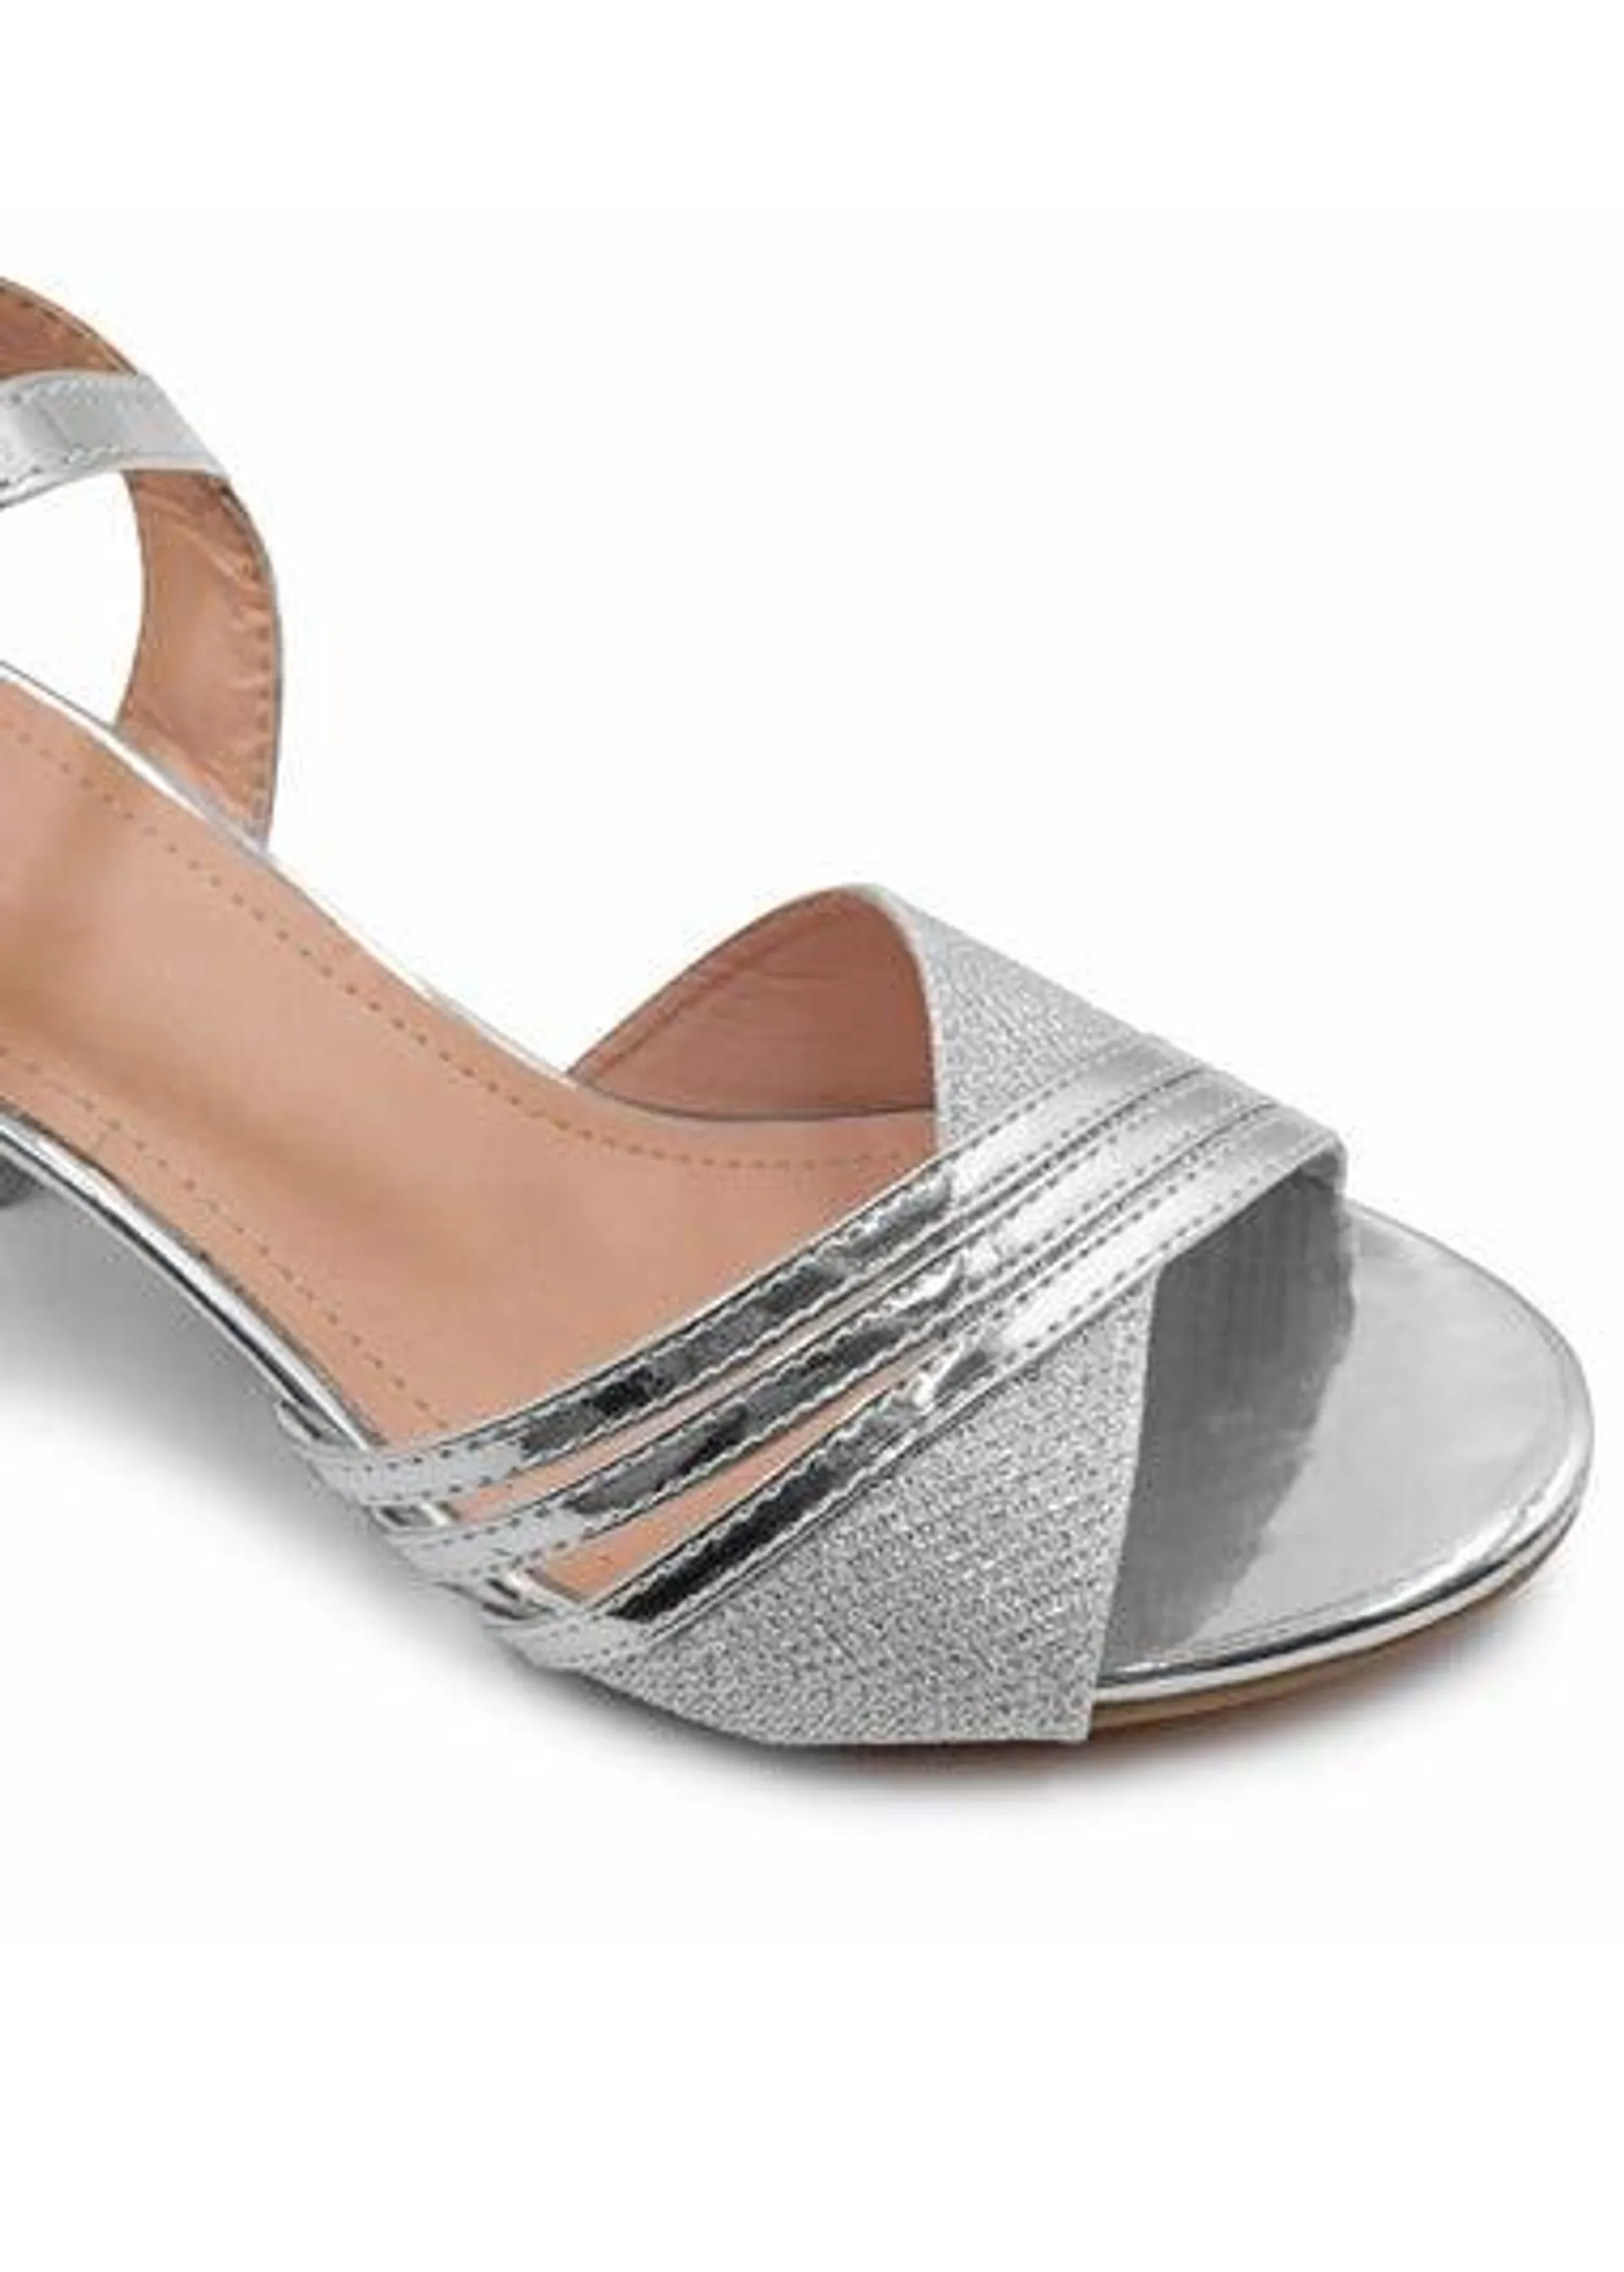 Where's That From Stormi Low Heel Sandals In Silver Glitter - Size 7